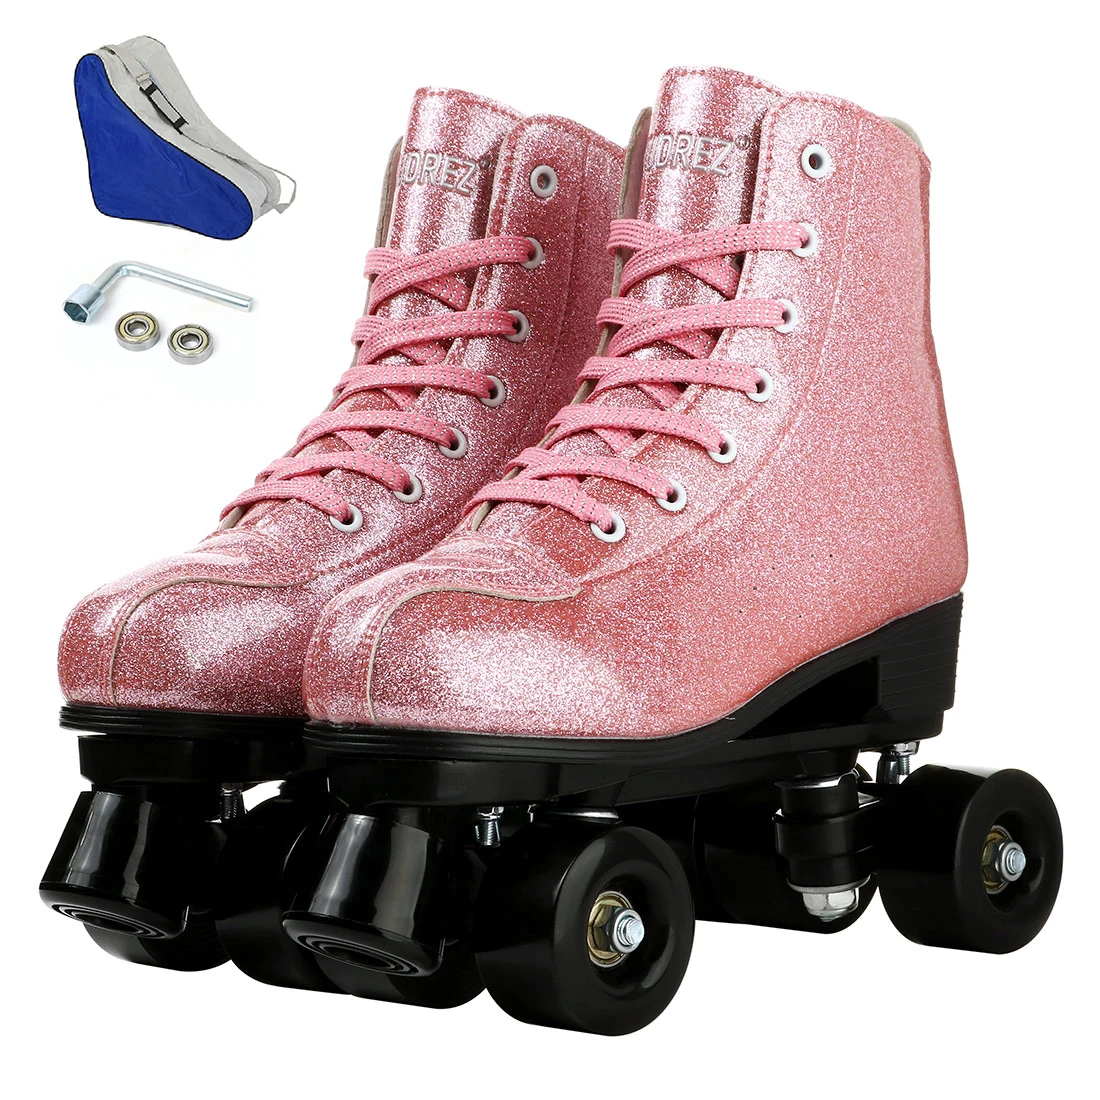 XUDREZ Roller Skates,Double Row Womens Skates Glitter Leather High-top Roller Skates Indoor Outdoor Adult Roller Skates with Bag and Repair Kits 